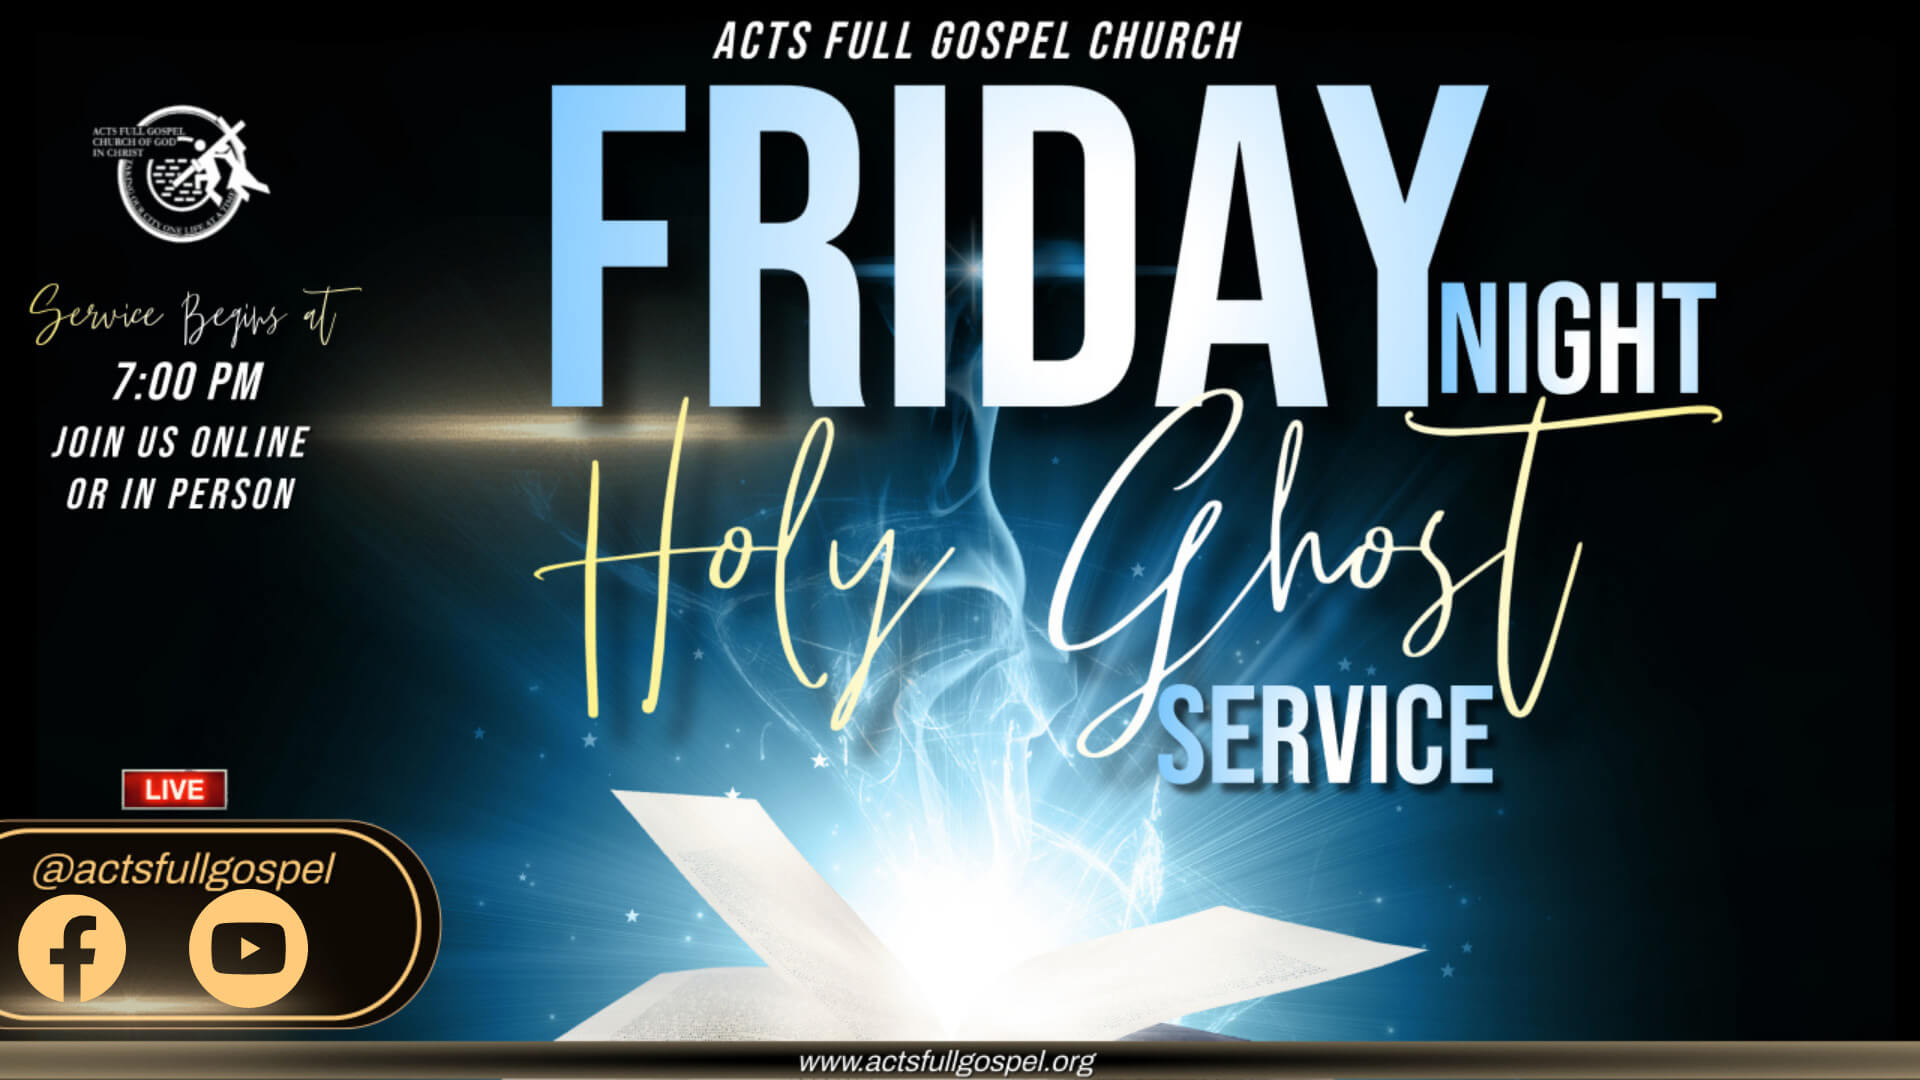 Friday Night Holy Ghost Service (1)